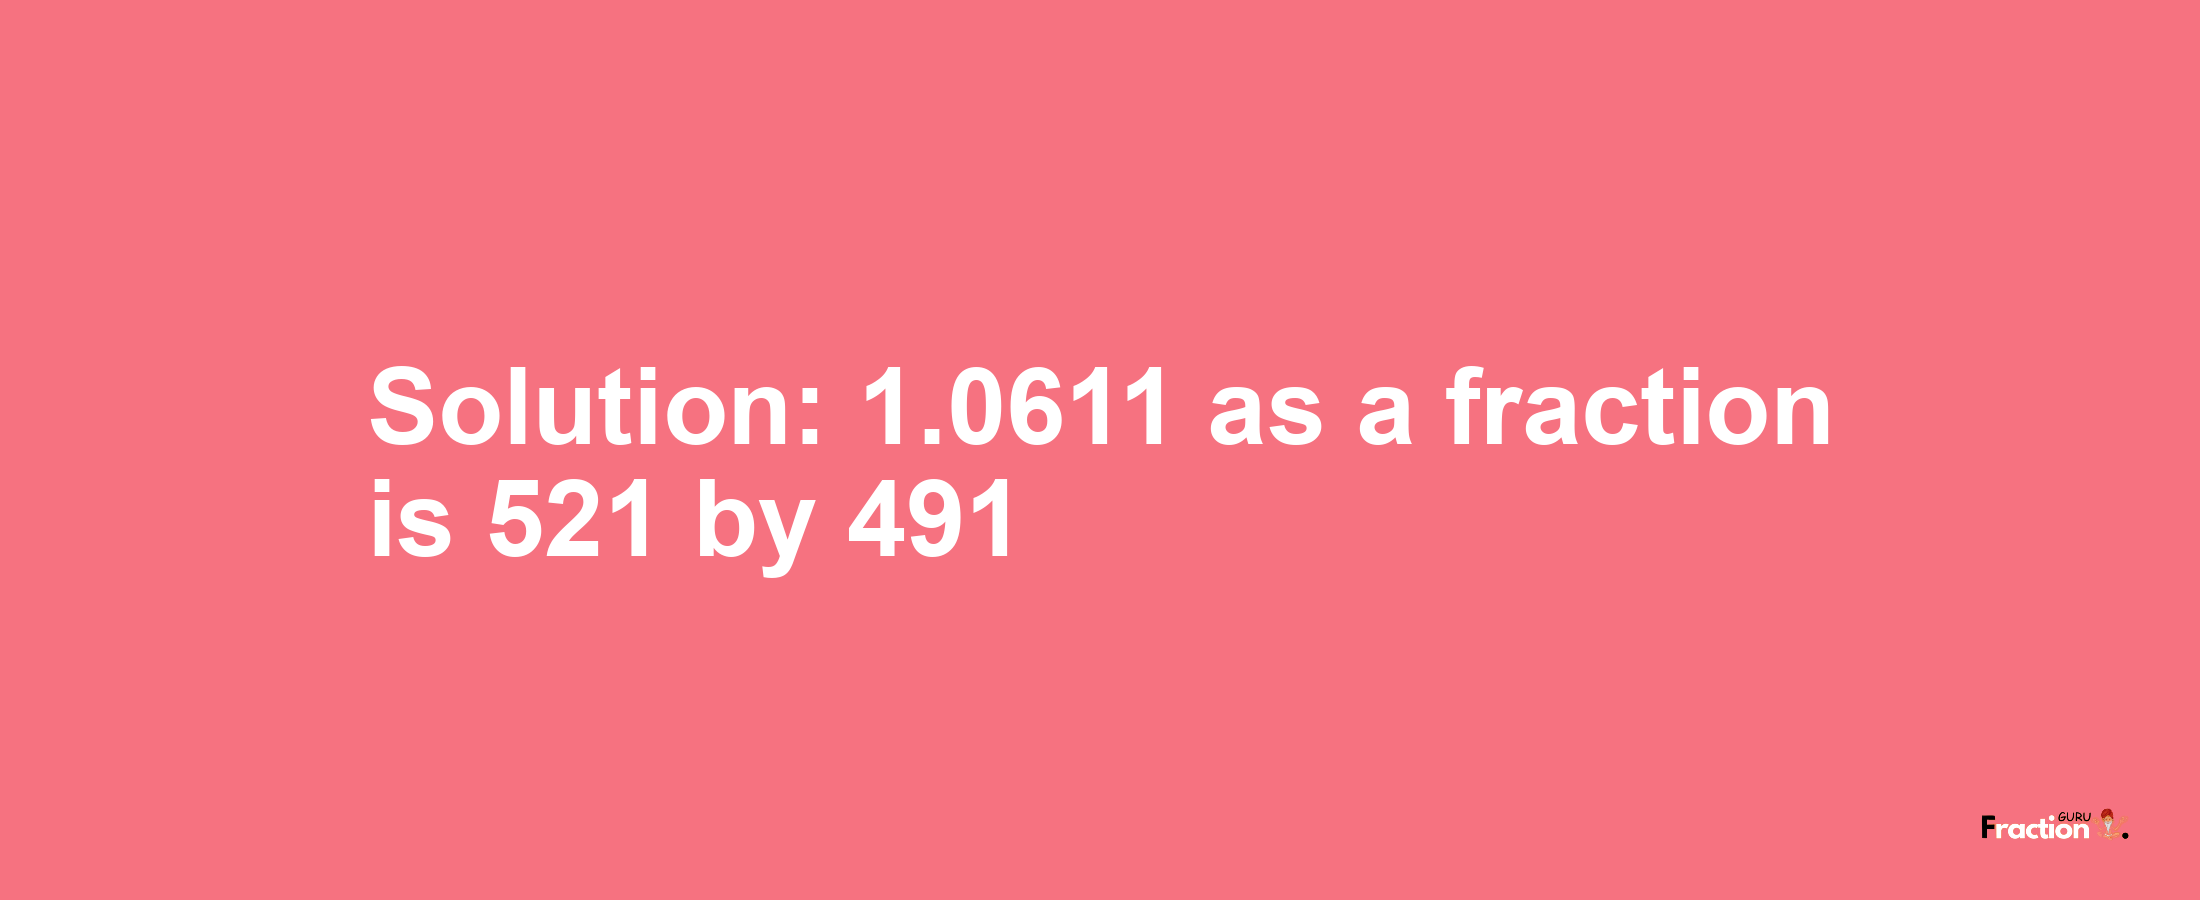 Solution:1.0611 as a fraction is 521/491